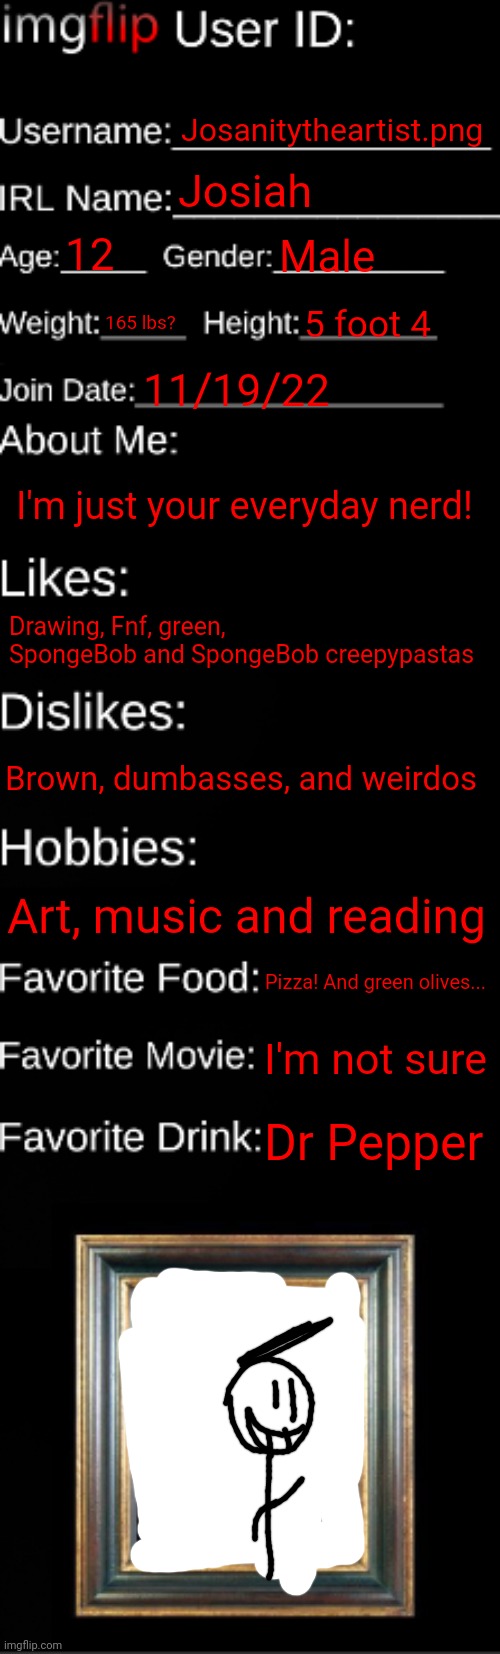 imgflip ID Card | Josanitytheartist.png; Josiah; 12; Male; 165 lbs? 5 foot 4; 11/19/22; I'm just your everyday nerd! Drawing, Fnf, green, SpongeBob and SpongeBob creepypastas; Brown, dumbasses, and weirdos; Art, music and reading; Pizza! And green olives... I'm not sure; Dr Pepper | image tagged in imgflip id card | made w/ Imgflip meme maker